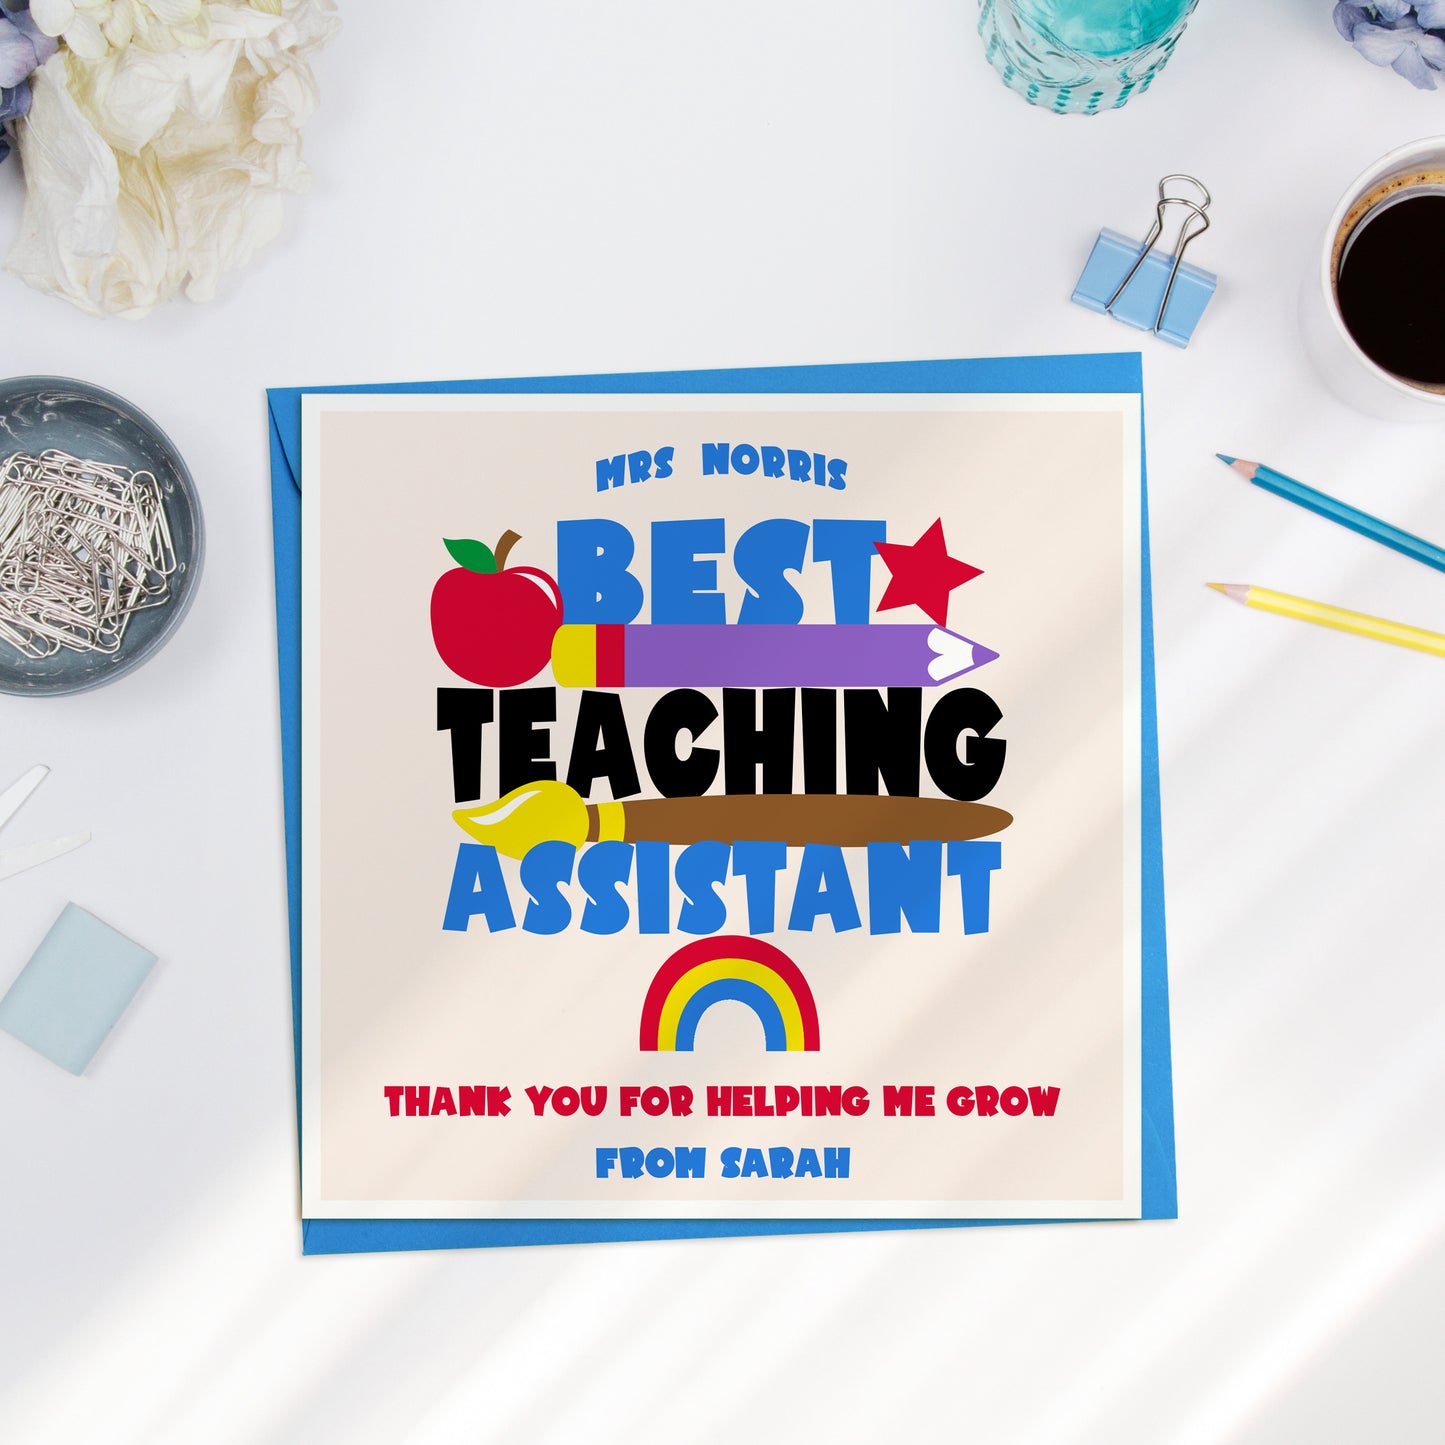 Personalised Card for the Best Teacher Assistant